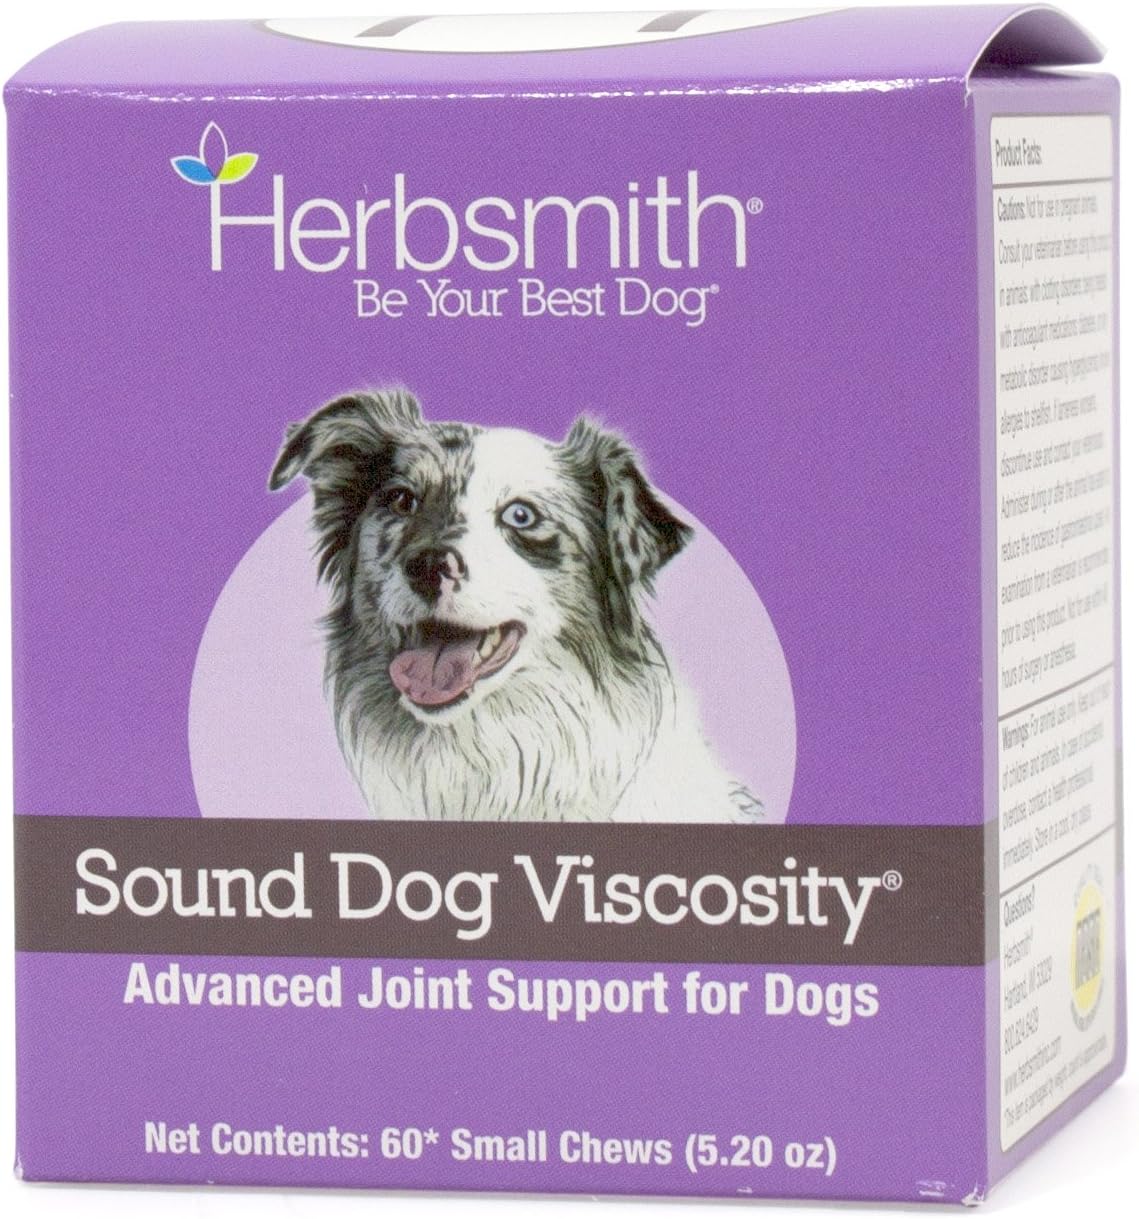 Herbsmith Sound Dog Viscosity Advanced Joint Support For Dogs